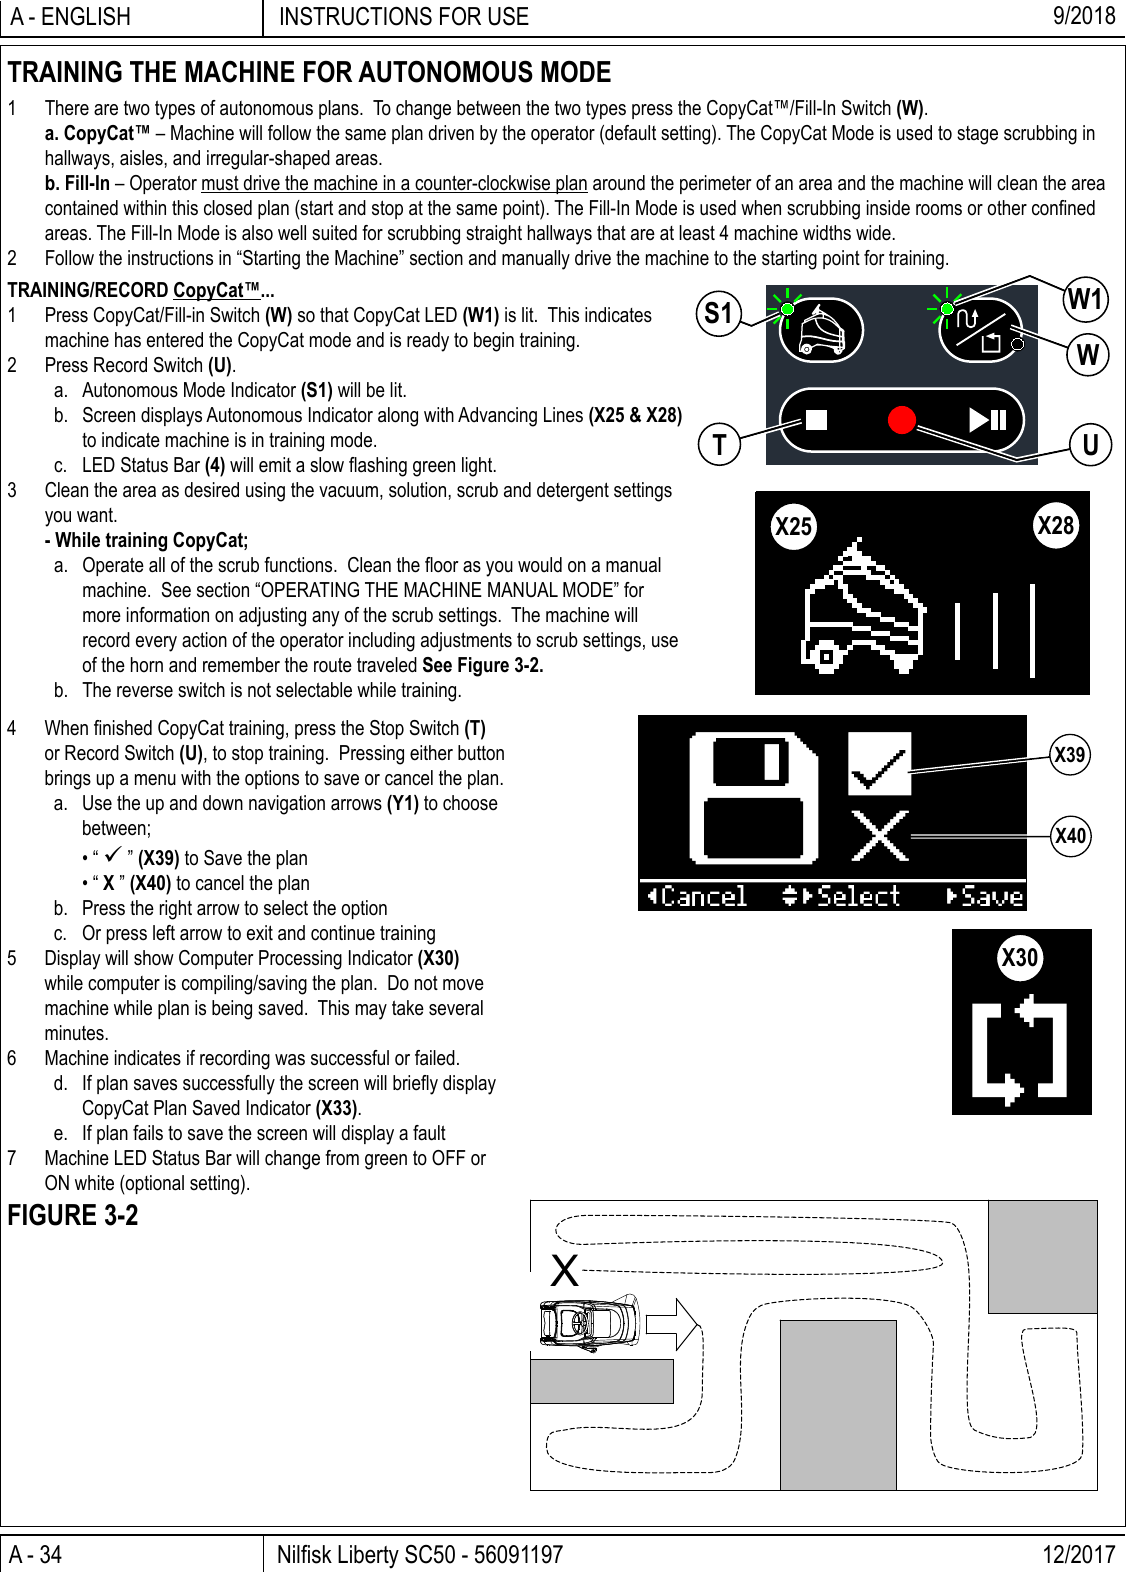 A - 34 Nilﬁ sk Liberty SC50 - 56091197 12/2017INSTRUCTIONS FOR USEA - ENGLISH 9/2018TRAINING/RECORD CopyCat™...1  Press CopyCat/Fill-in Switch (W) so that CopyCat LED (W1) is lit.  This indicates machine has entered the CopyCat mode and is ready to begin training.2  Press Record Switch (U).a.  Autonomous Mode Indicator (S1) will be lit.b.  Screen displays Autonomous Indicator along with Advancing Lines (X25 &amp; X28) to indicate machine is in training mode.c.  LED Status Bar (4) will emit a slow ﬂ ashing green light.3  Clean the area as desired using the vacuum, solution, scrub and detergent settings you want.  - While training CopyCat;a.  Operate all of the scrub functions.  Clean the ﬂ oor as you would on a manual machine.  See section “OPERATING THE MACHINE MANUAL MODE” for more information on adjusting any of the scrub settings.  The machine will record every action of the operator including adjustments to scrub settings, use of the horn and remember the route traveled See Figure 3-2.b.  The reverse switch is not selectable while training.TRAINING THE MACHINE FOR AUTONOMOUS MODE1  There are two types of autonomous plans.  To change between the two types press the CopyCat™/Fill-In Switch (W). a. CopyCat™ – Machine will follow the same plan driven by the operator (default setting). The CopyCat Mode is used to stage scrubbing in hallways, aisles, and irregular-shaped areas. b. Fill-In – Operator must drive the machine in a counter-clockwise plan around the perimeter of an area and the machine will clean the area contained within this closed plan (start and stop at the same point). The Fill-In Mode is used when scrubbing inside rooms or other conﬁ ned areas. The Fill-In Mode is also well suited for scrubbing straight hallways that are at least 4 machine widths wide.2  Follow the instructions in “Starting the Machine” section and manually drive the machine to the starting point for training.X4 When ﬁ nished CopyCat training, press the Stop Switch (T) or Record Switch (U), to stop training.  Pressing either button brings up a menu with the options to save or cancel the plan.a.  Use the up and down navigation arrows (Y1) to choose between; • “  ” (X39) to Save the plan • “ X ” (X40) to cancel the planb.  Press the right arrow to select the optionc.  Or press left arrow to exit and continue training5  Display will show Computer Processing Indicator (X30) while computer is compiling/saving the plan.  Do not move machine while plan is being saved.  This may take several minutes.6  Machine indicates if recording was successful or failed.d.  If plan saves successfully the screen will brieﬂ y display CopyCat Plan Saved Indicator (X33).e.  If plan fails to save the screen will display a fault7  Machine LED Status Bar will change from green to OFF or ON white (optional setting).FIGURE 3-2WW1UTS1X25 X28X39X40X30